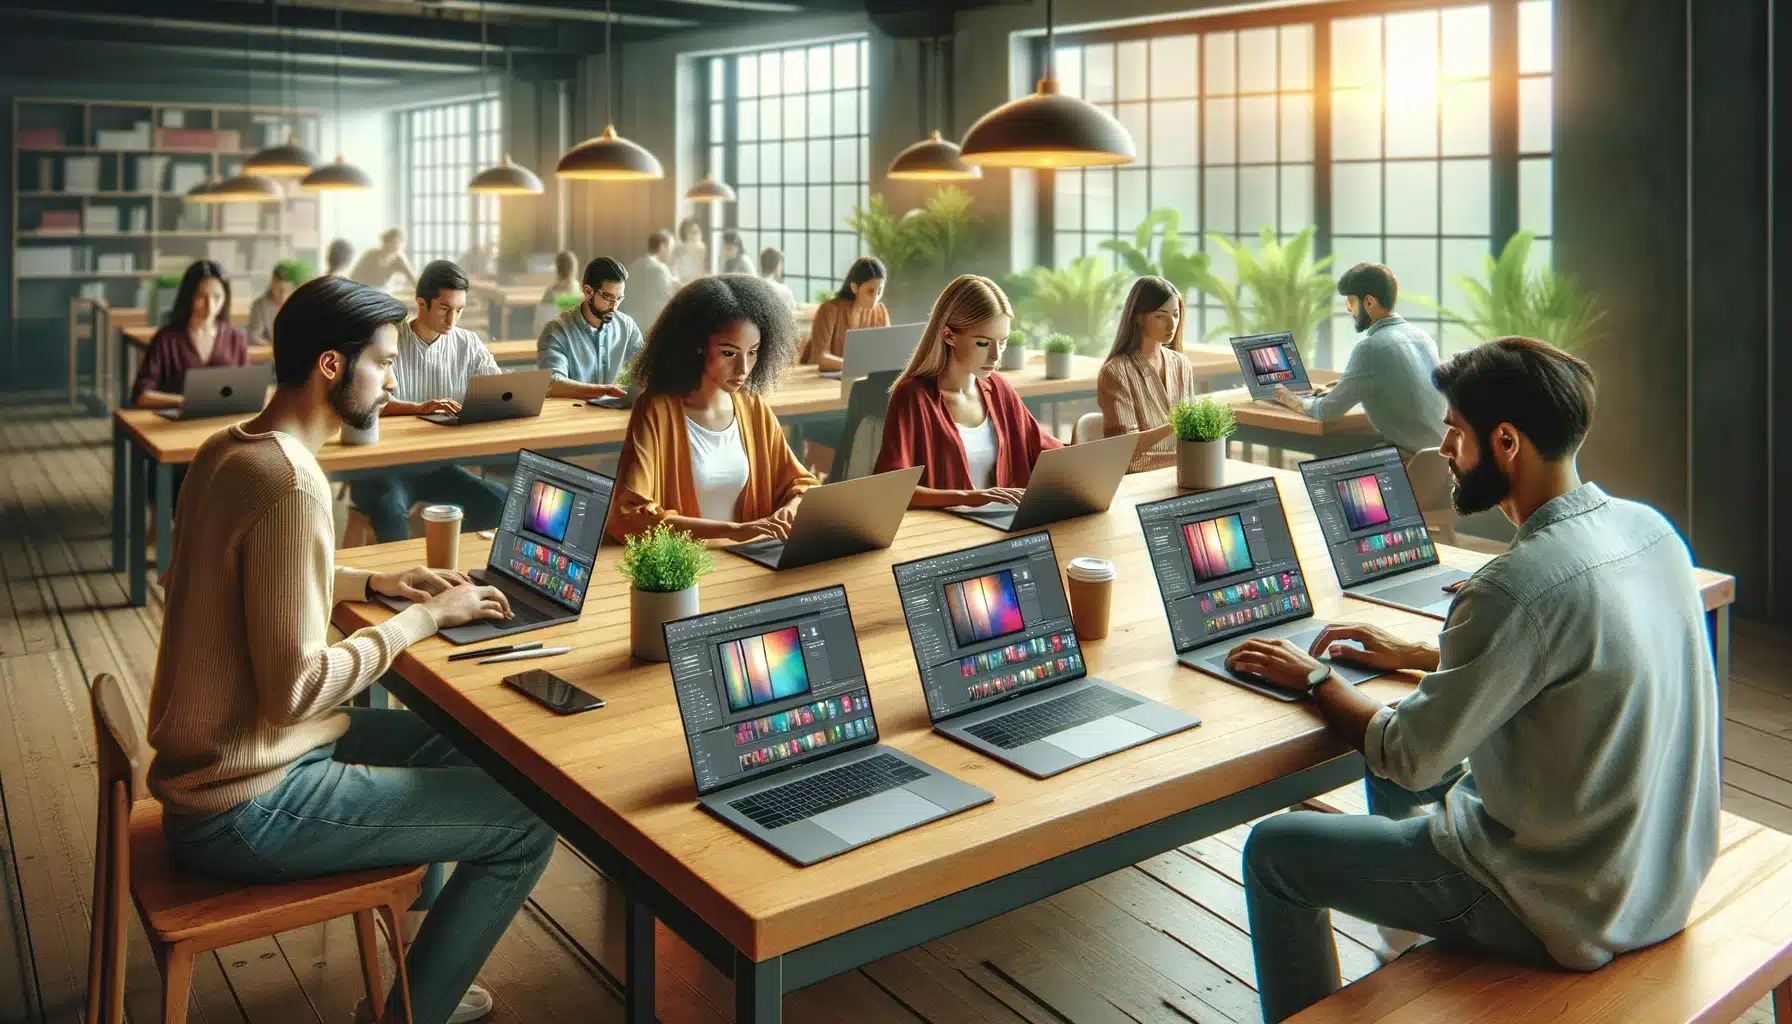 Multiple professionals in a coworking space intently using laptops displaying generic image editing software, emphasizing a creative and modern working environment.